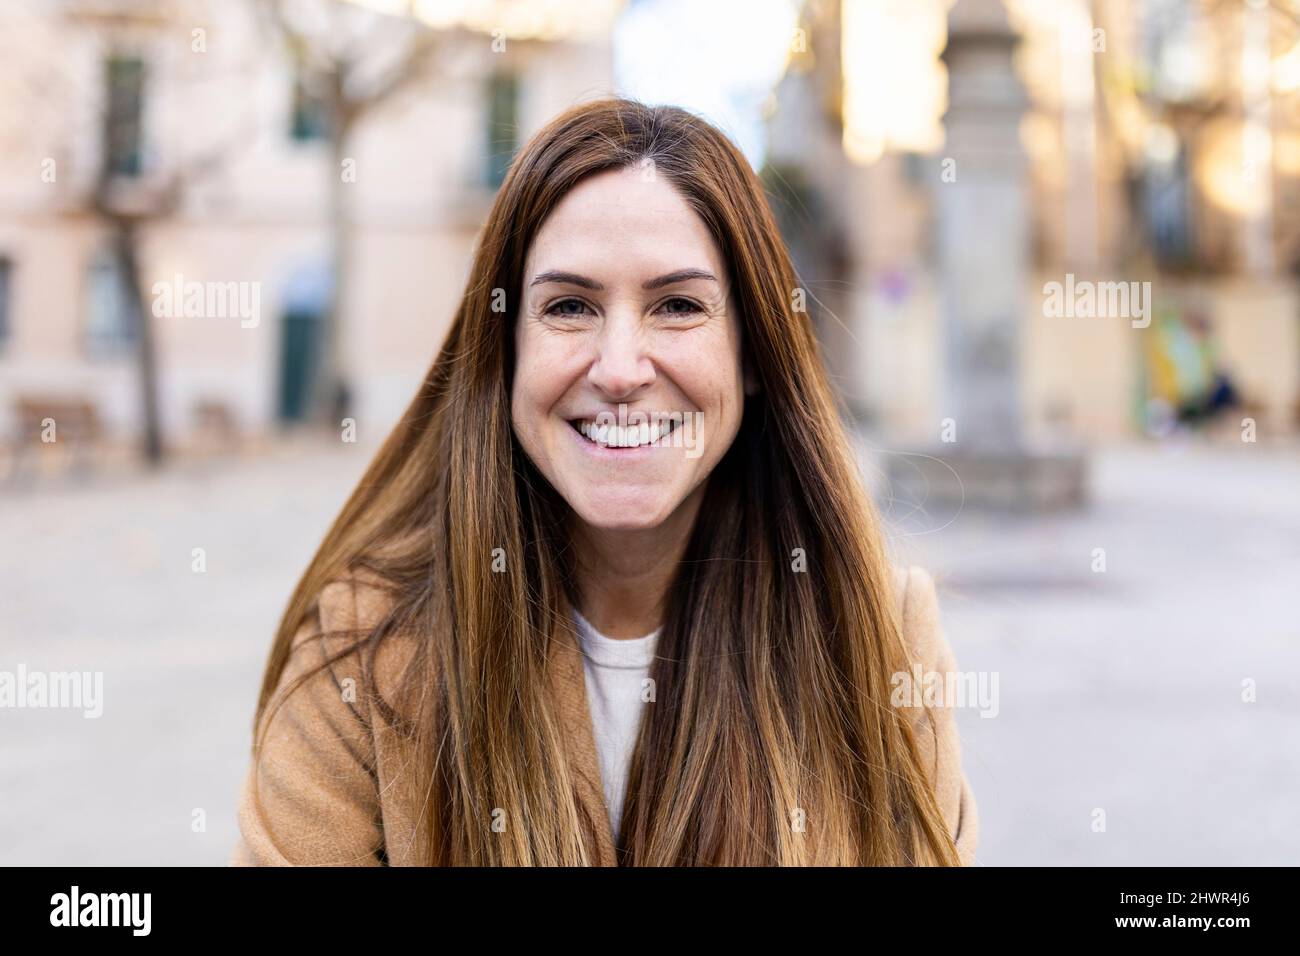 Happy woman with long brown hair in city Stock Photo